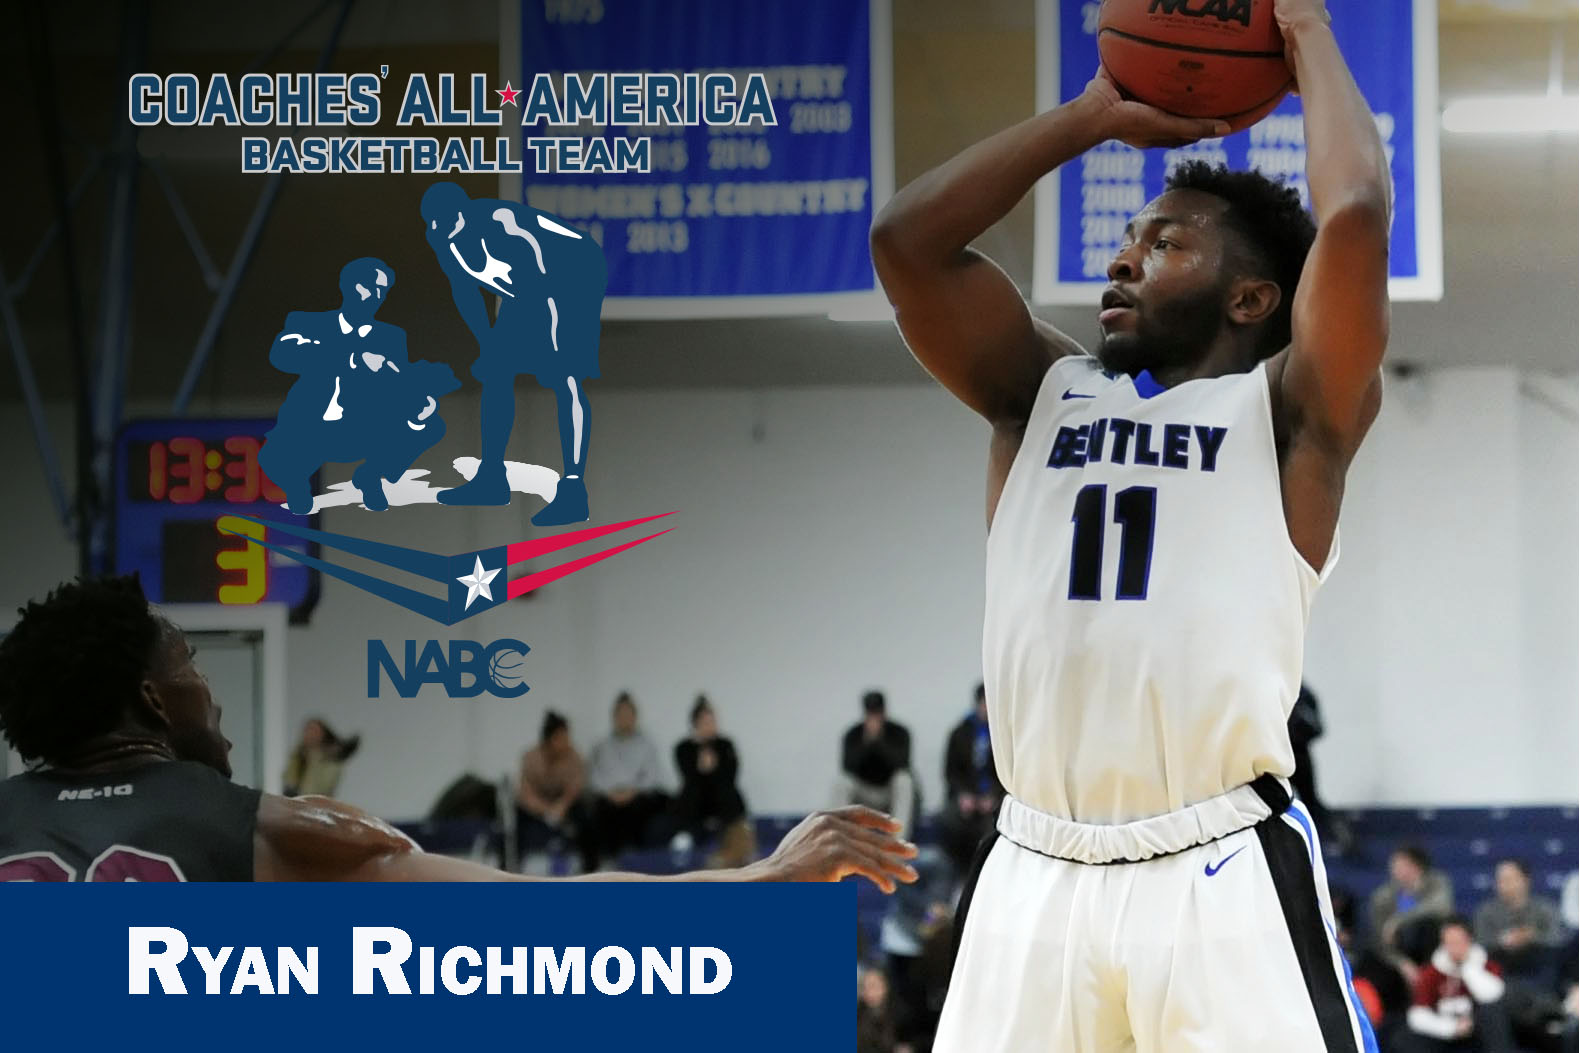 Richmond Named NABC All-America; Also Selected for Reese’s All-Star Game